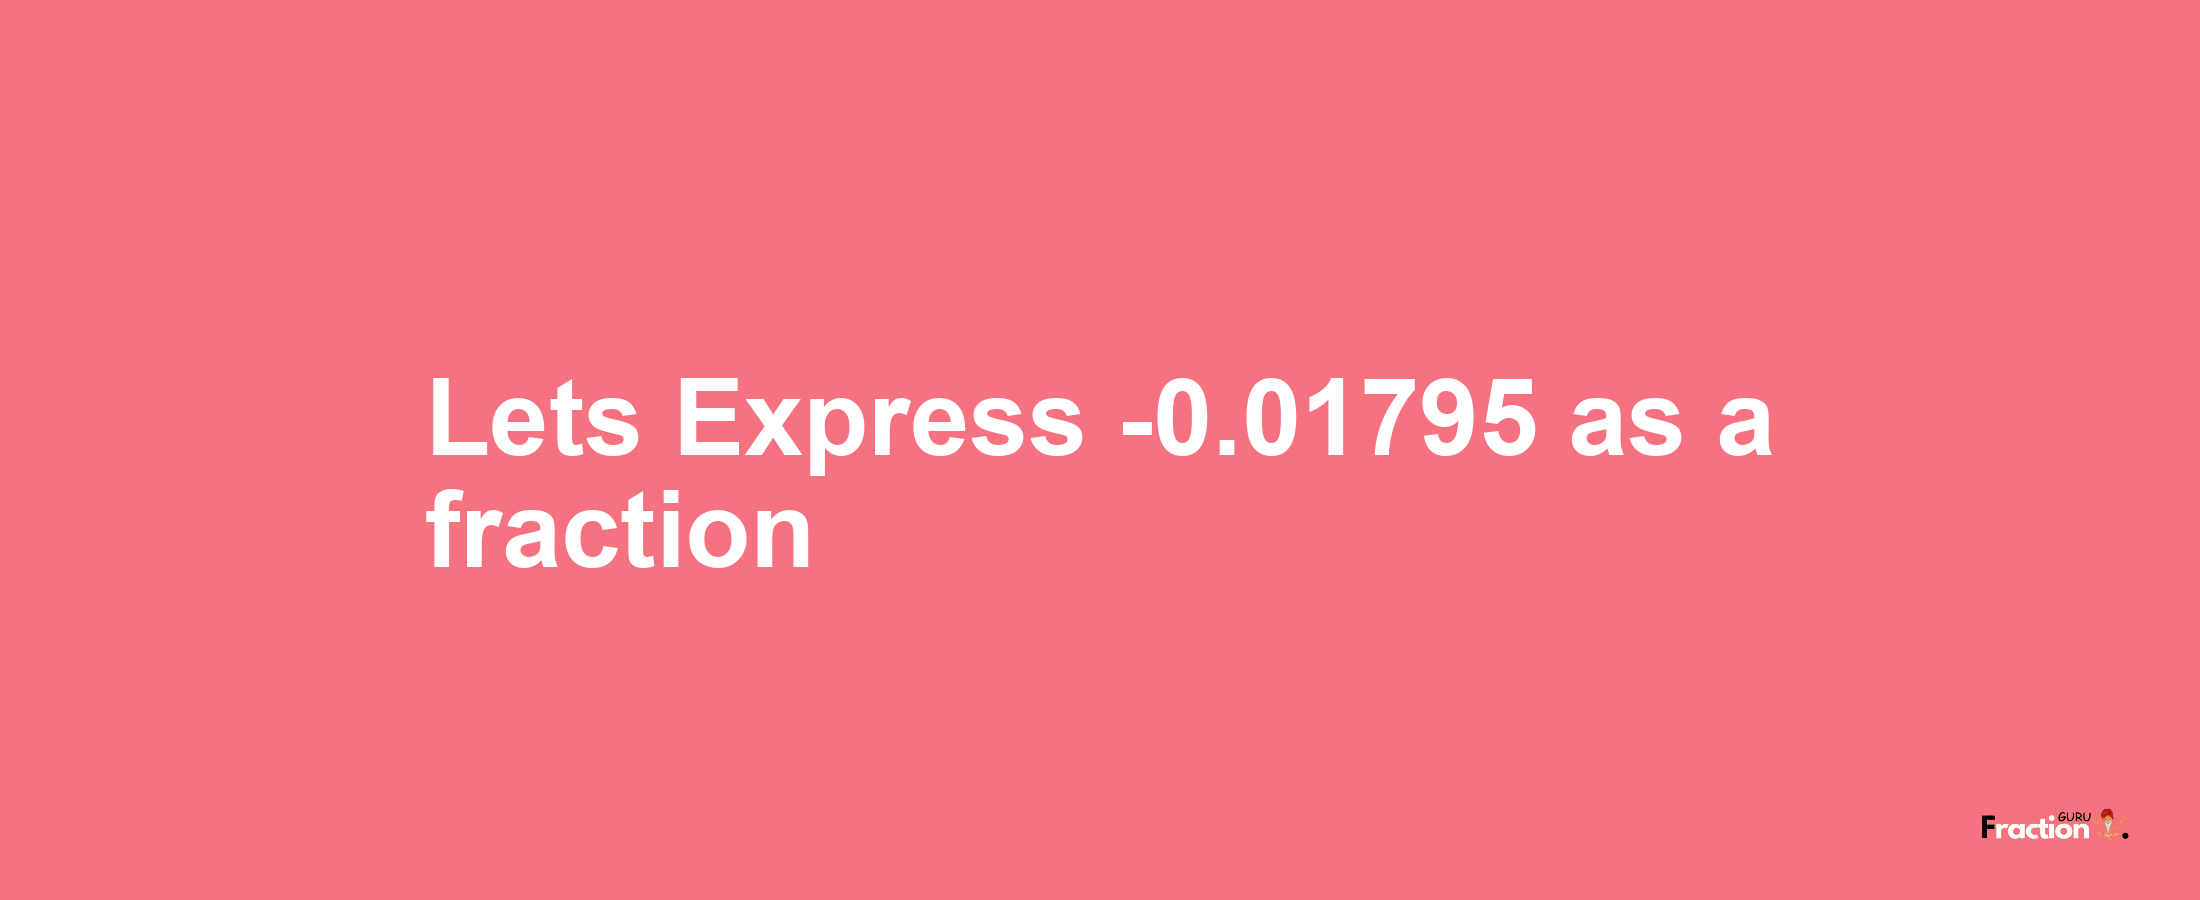 Lets Express -0.01795 as afraction